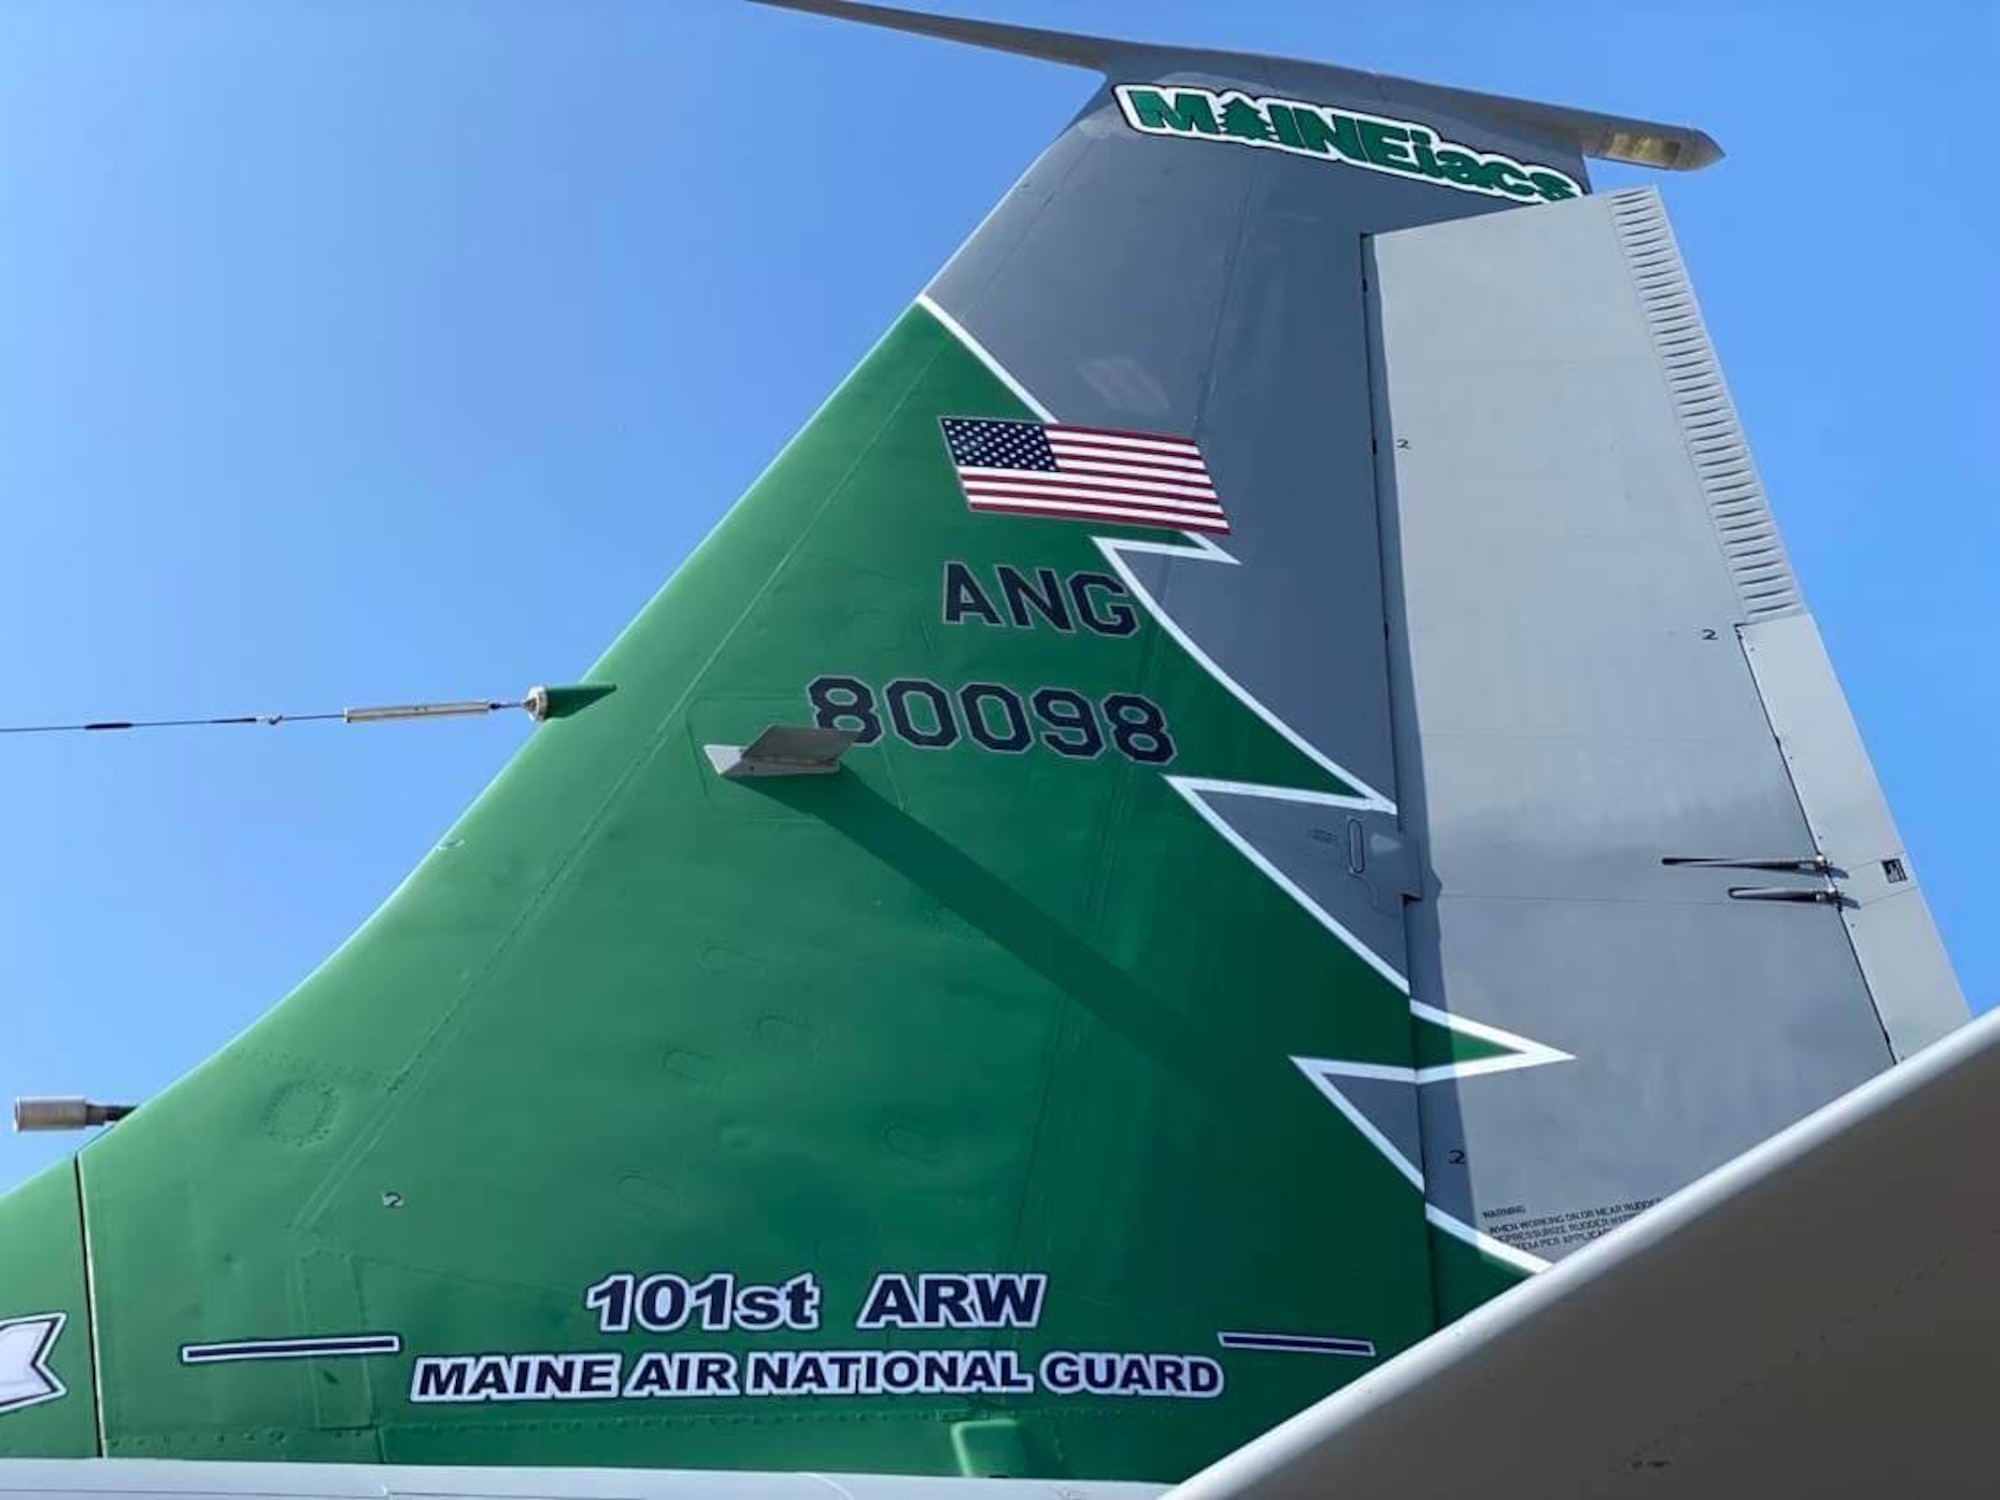 Tail art on a KC-135 Stratotanker from the Maine Air National Guard's 101st Air Refueling Wing. The 101st ARW announced its plan on Jan. 4, 2022, to pursue replacing the KC-135 airframe with the new KC-46 Pegasus air refueling tanker.